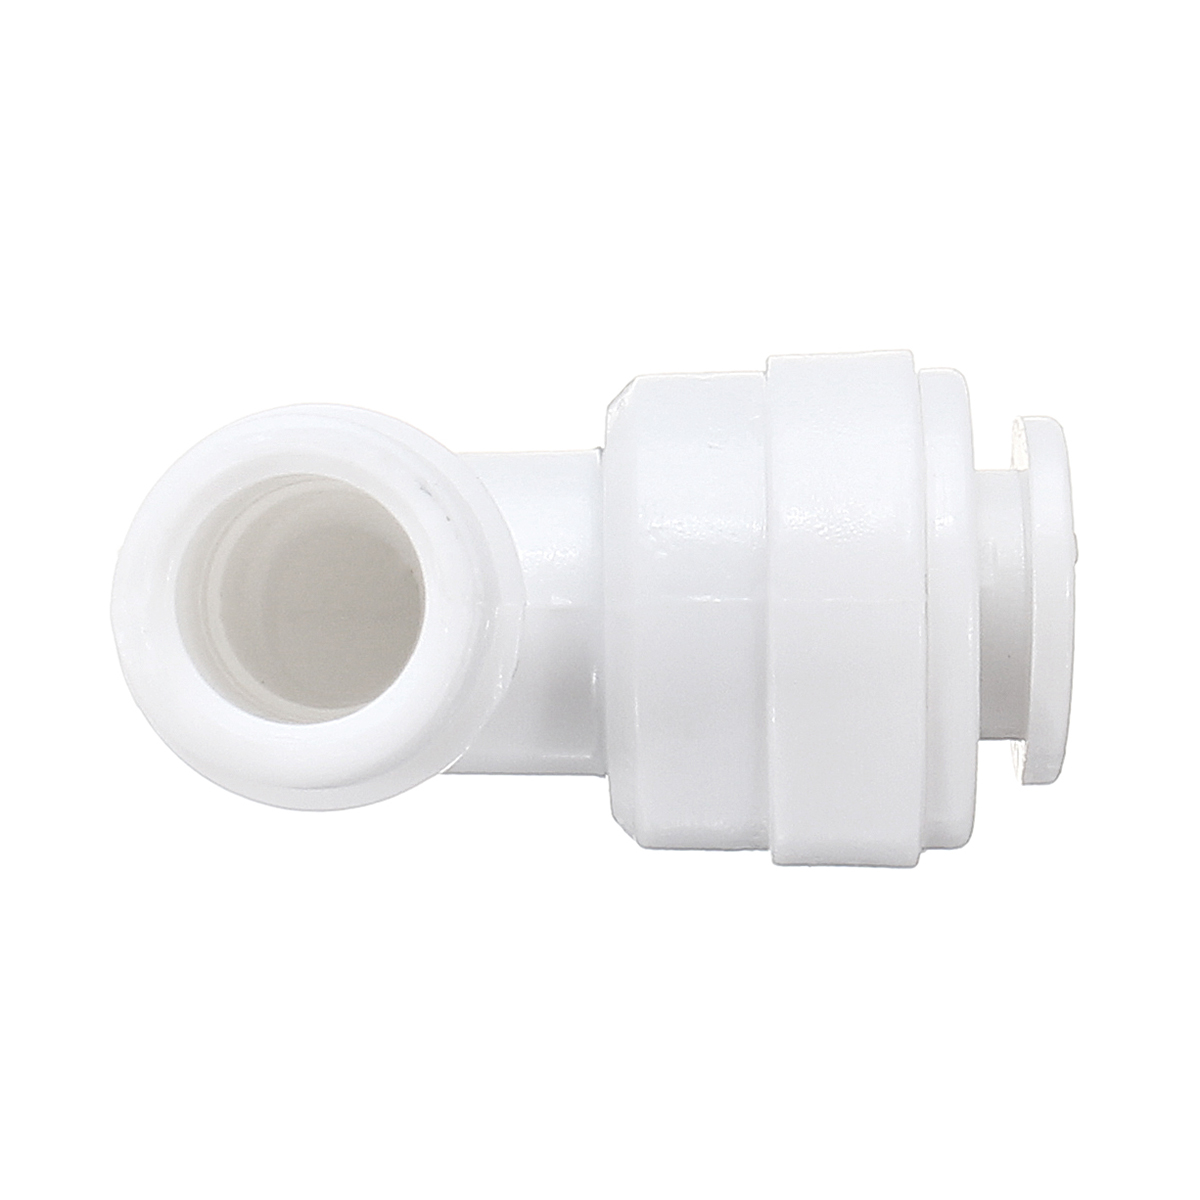 14-18-Inch-RO-Grade-Water-Tube-Fitting-Quick-Push-In-to-Connection-Pipes-Fittings-for-Water-Filter-1378008